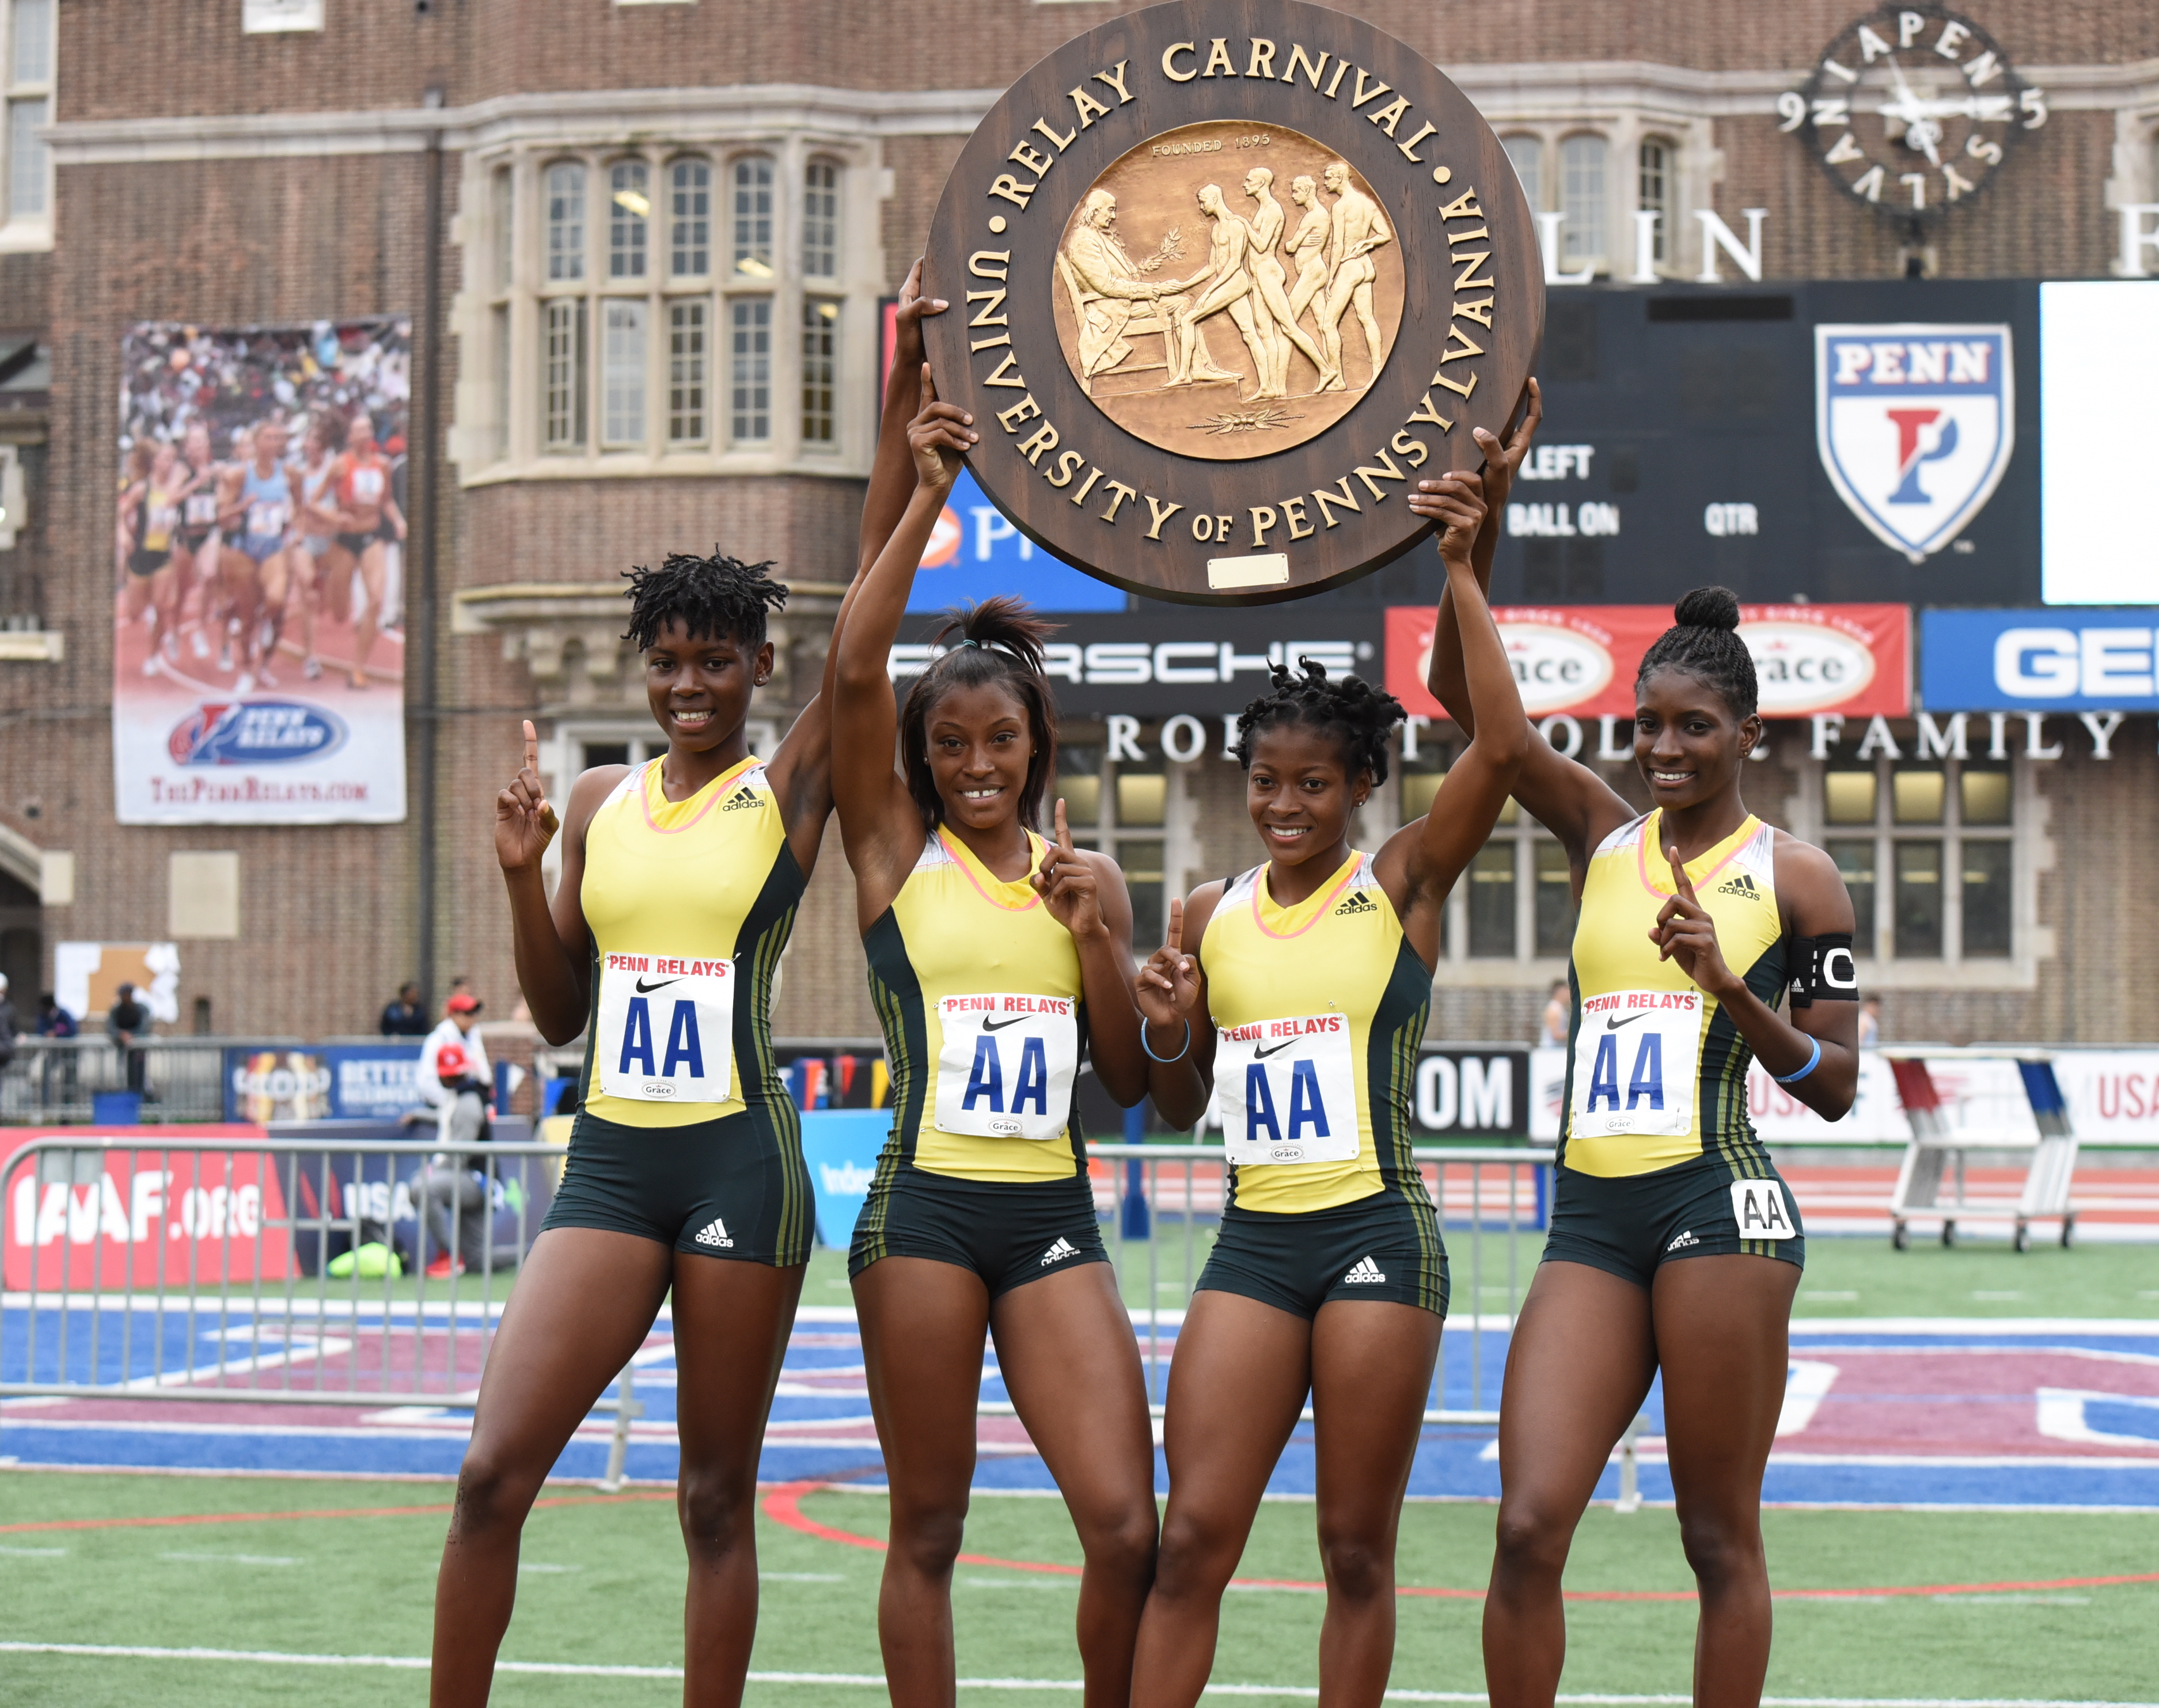 Hydel retains 4x400m title at Penn Relays